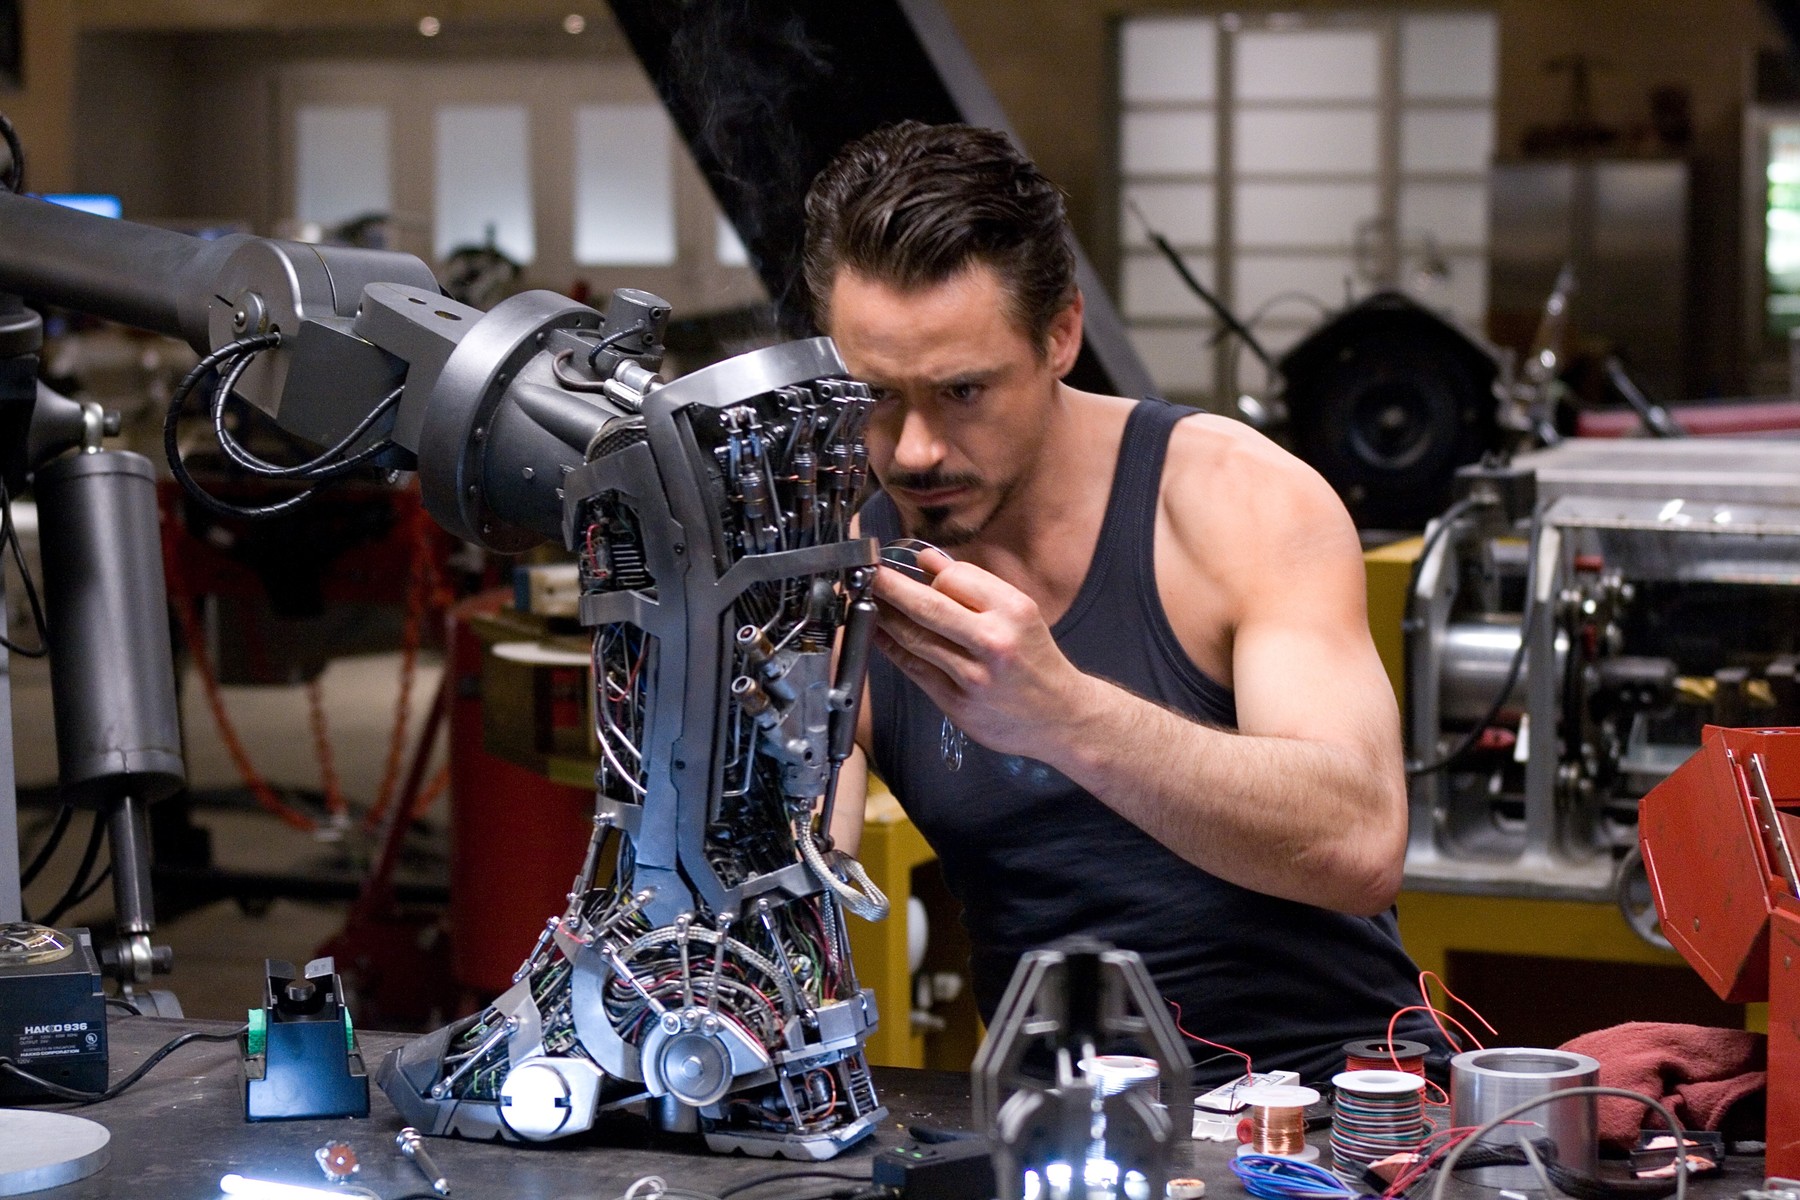 The technology featured in the Iron Man movies is now a reality, so will anyone soon be able to feel like Tony Stark in their own home?